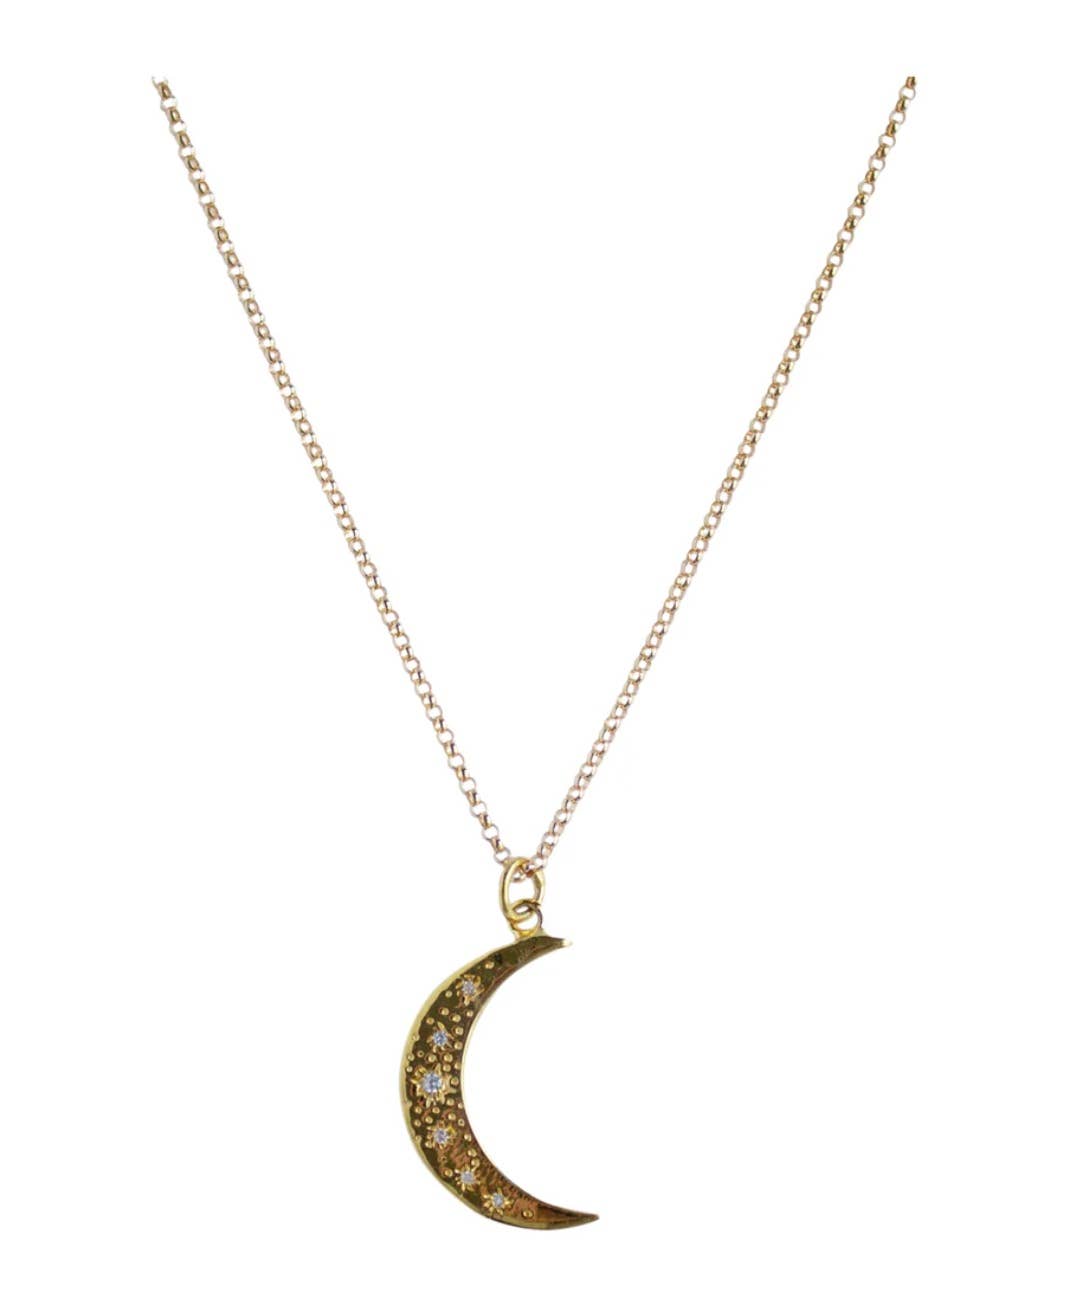 HoopLa Style - Moon Crescent Necklace- Steel 14K Gold Engraved